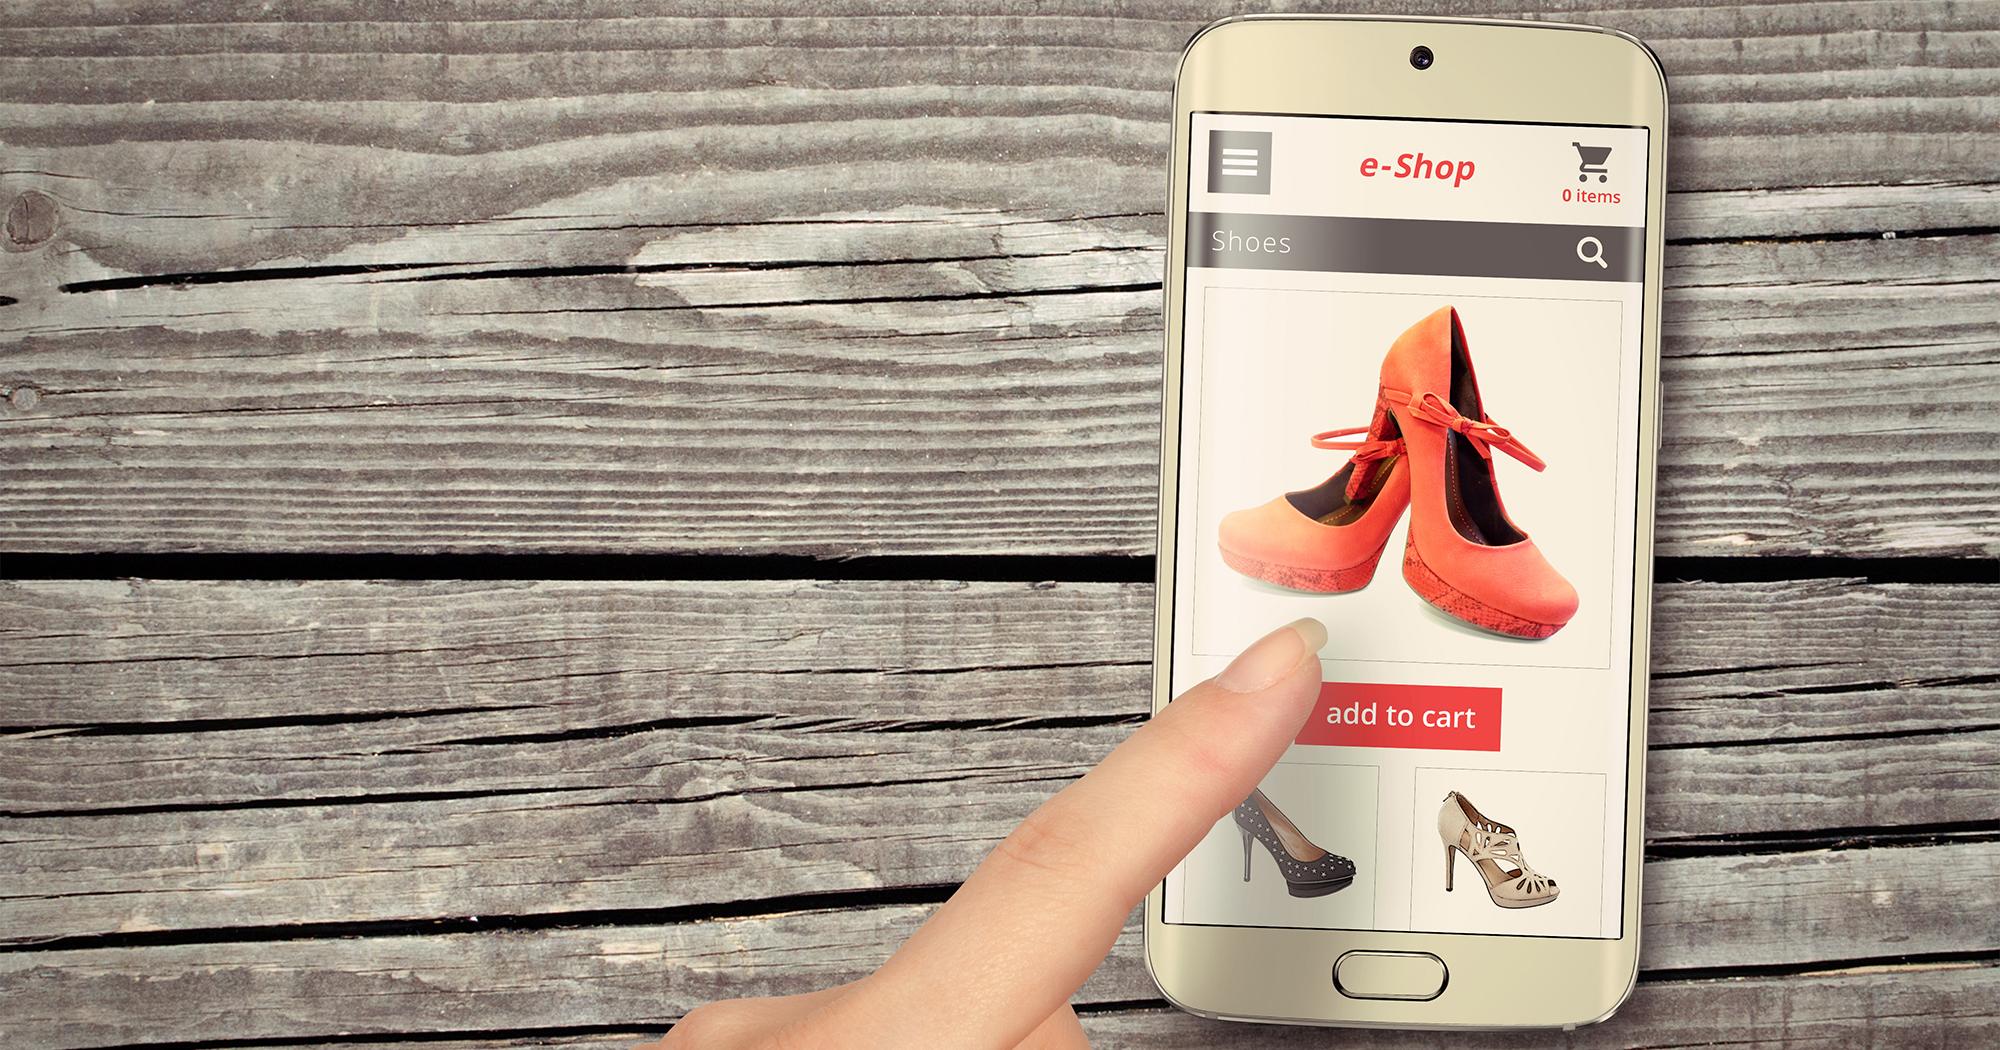 4 Things You Need to Know Before Launching an Ecommerce Smartphone App